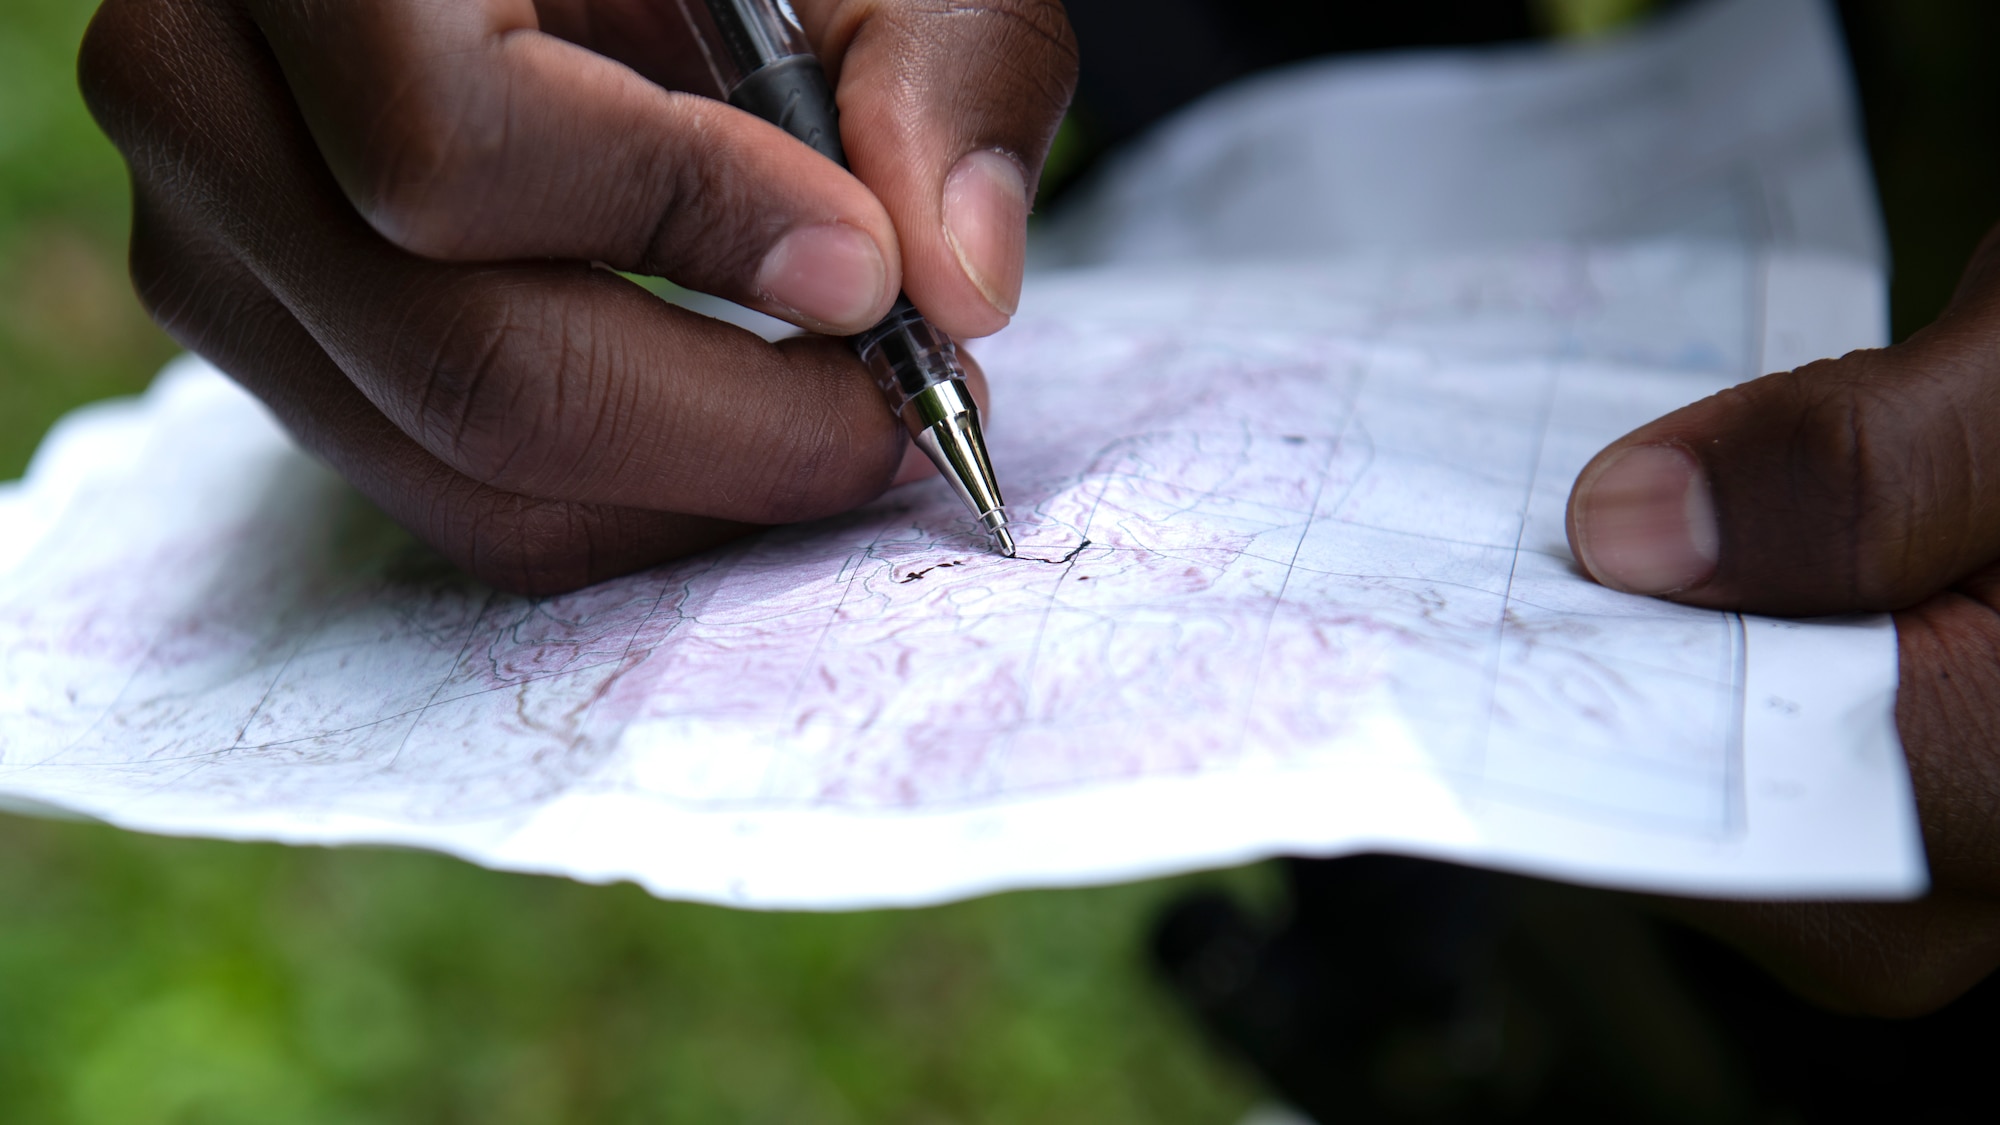 A U.S. Air Force Airman assigned to the 18th Security Forces Squadron marks a location on a map during a field training exercise at Kadena Air Base, Japan, April 27, 2022. Land navigation is a critical skill for SFS Airmen, utilizing maps with reference to terrain, a compass and other vital navigation tools. (U.S. Air Force photo by Senior Airman Jessi Monte)